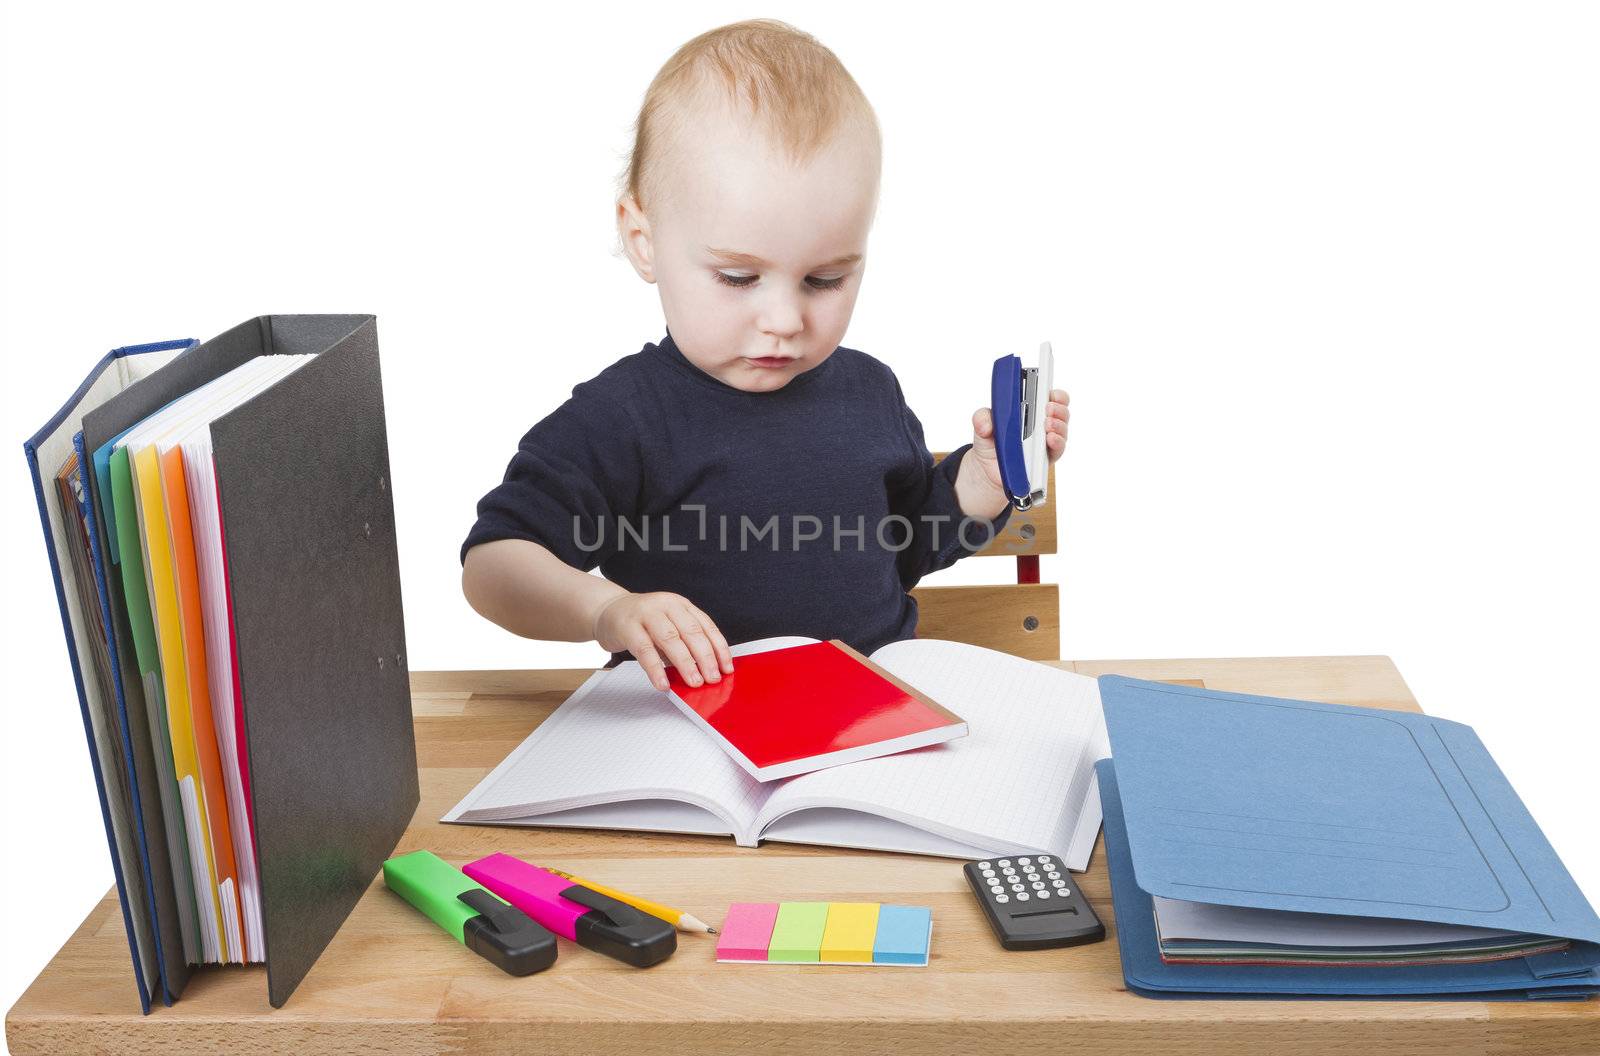 young child working at writing desk in light background